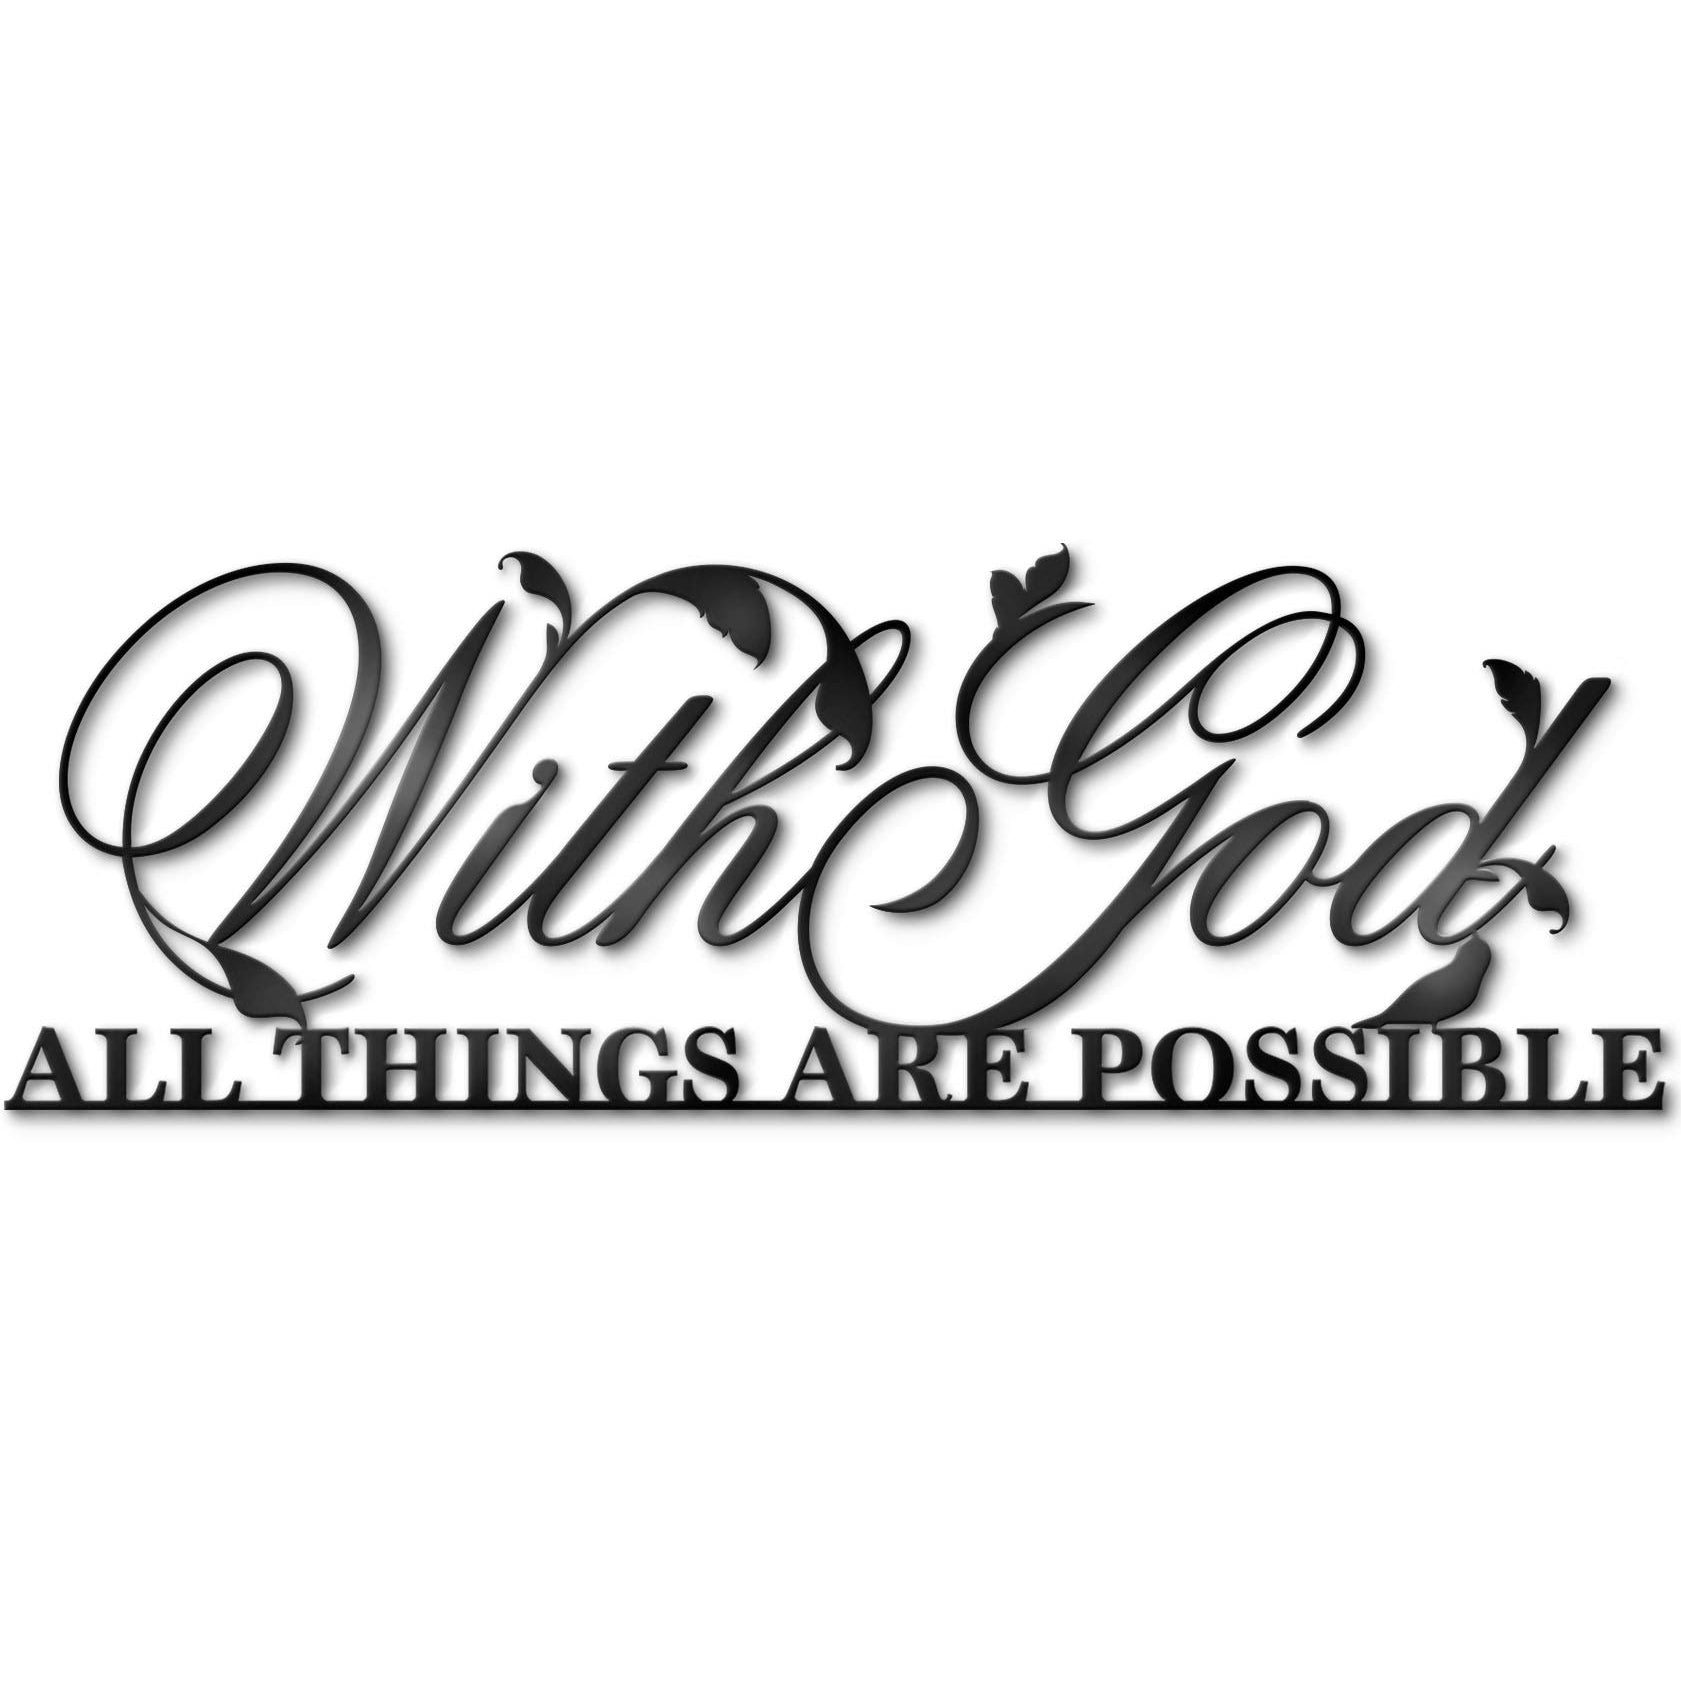 Gialer With God All Things Are Possible Sign Metal Wall Decor, 18"X12" Inch Religious Scripture Black Christian Bible Verses